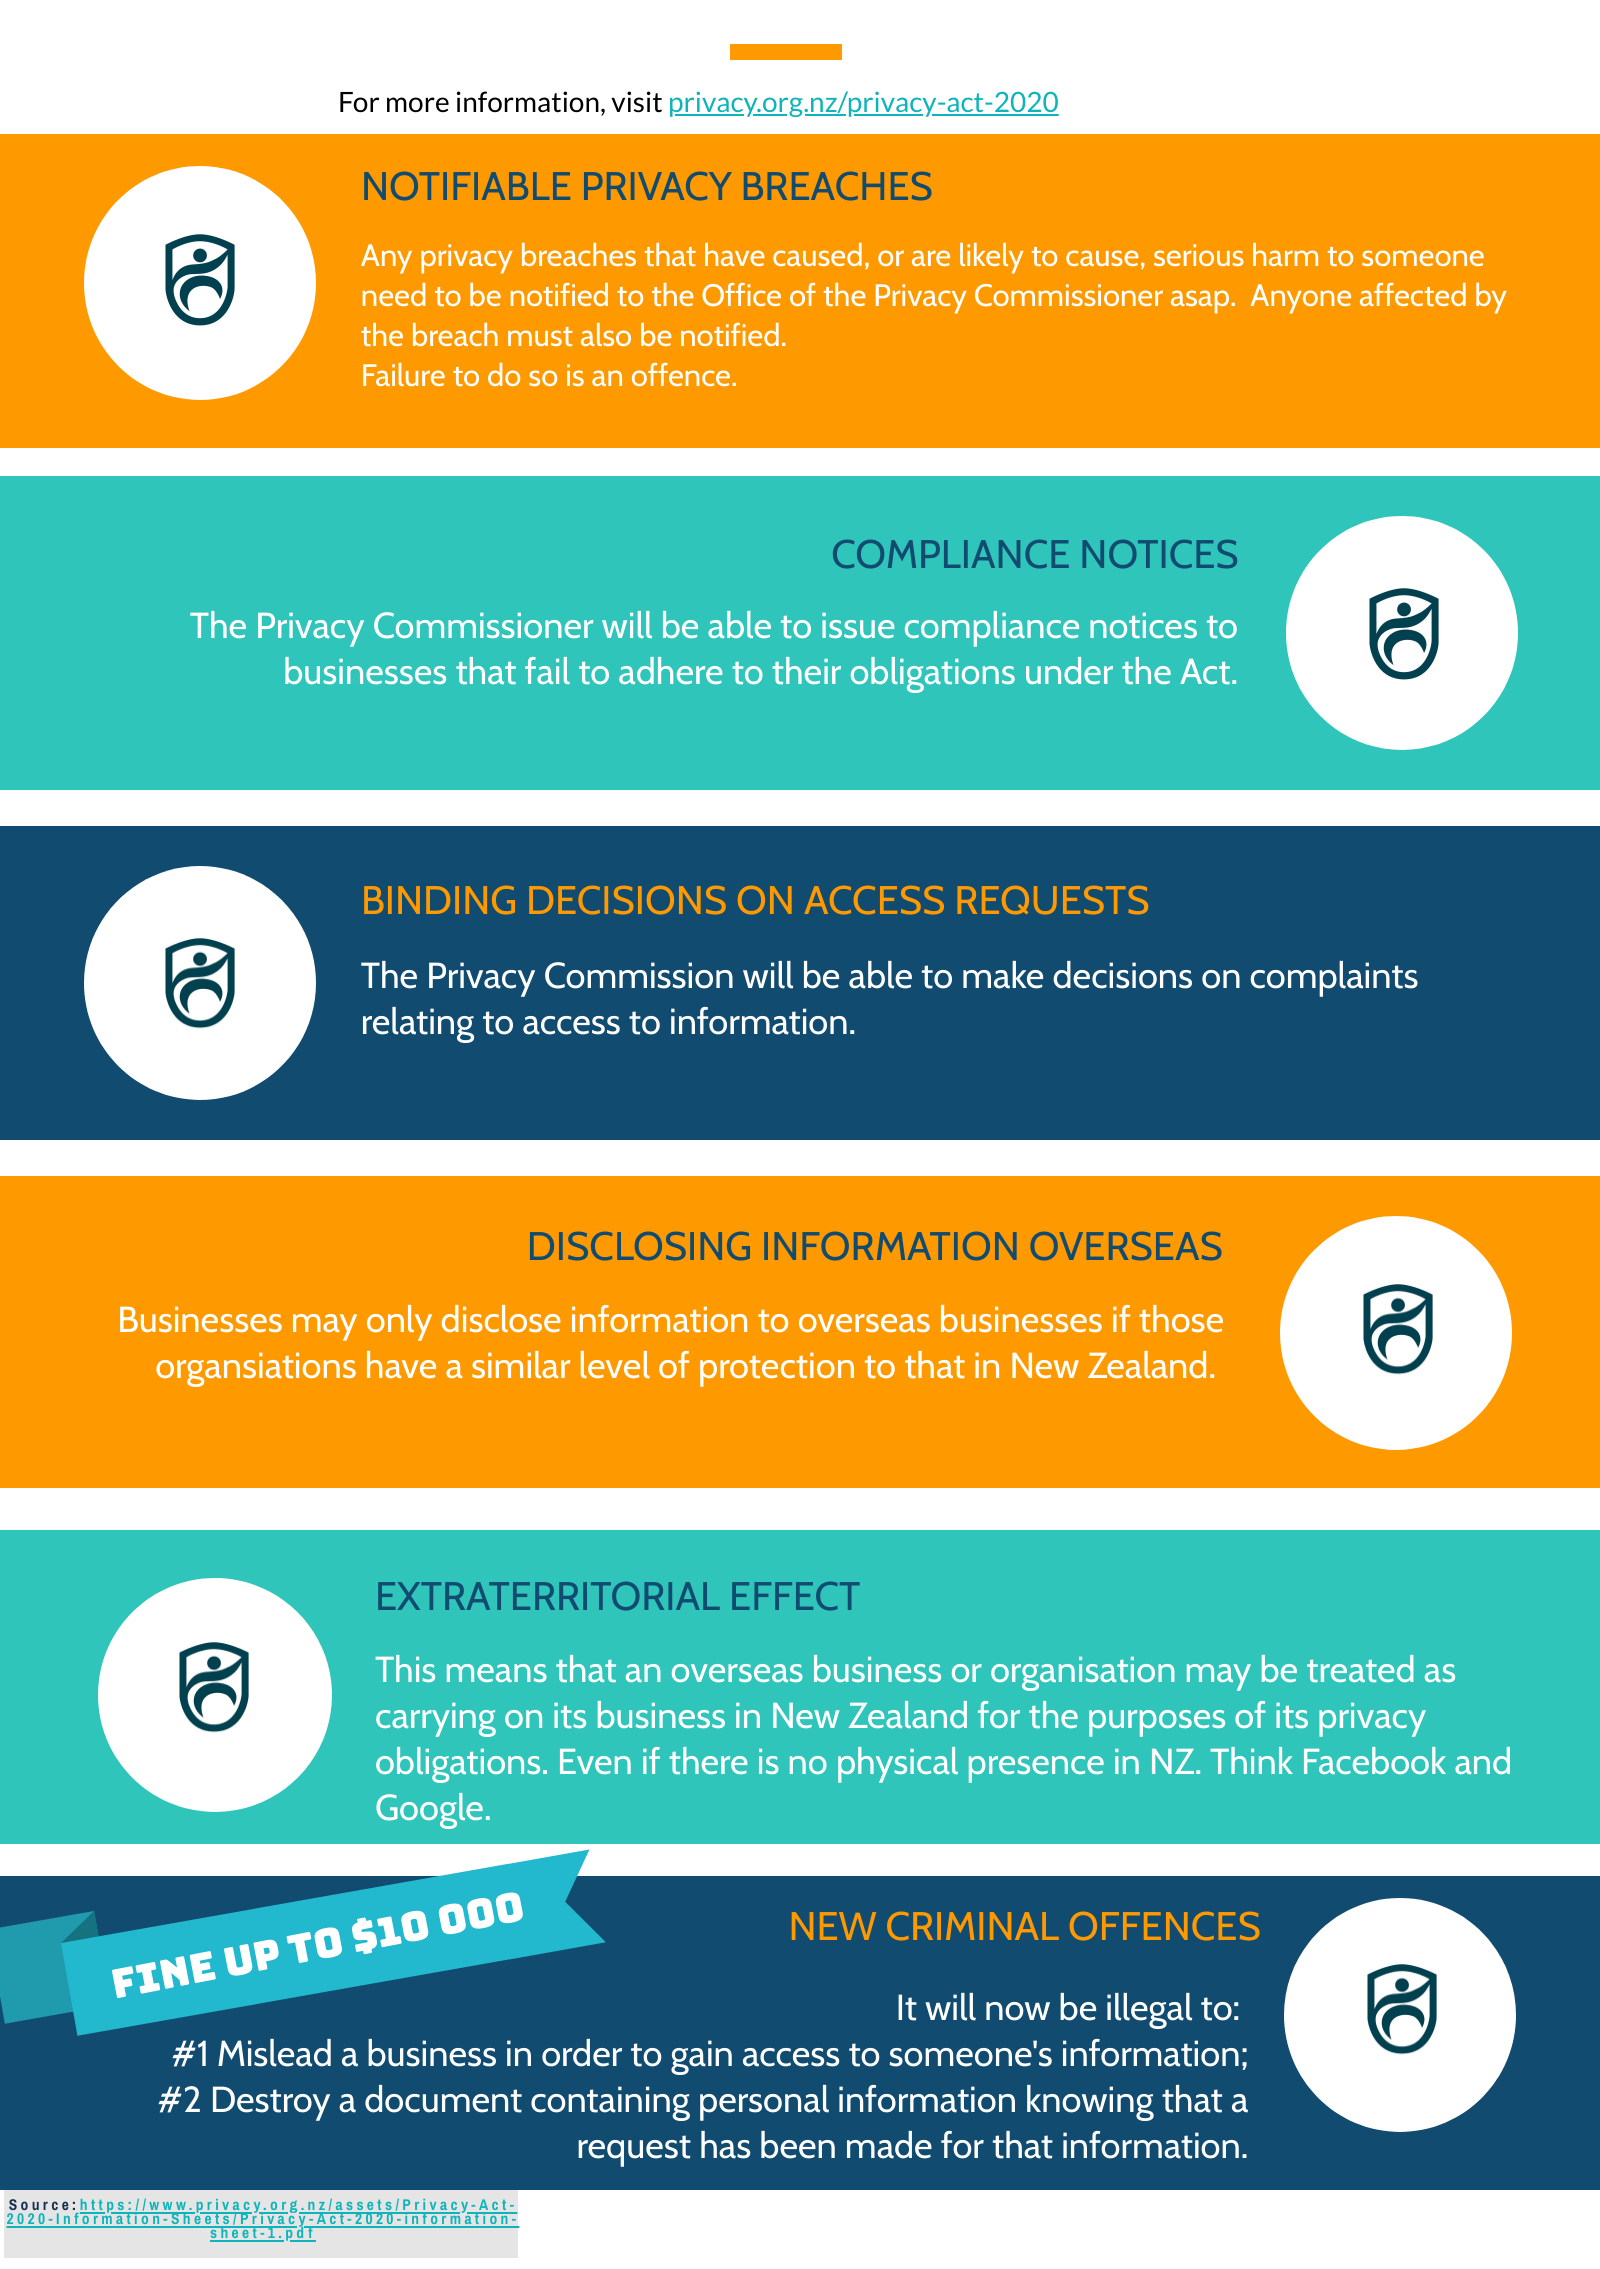 Infographic PrivacyActNZ2020 3 - Is Your Website Compliant With The NZ Privacy Act 2020?